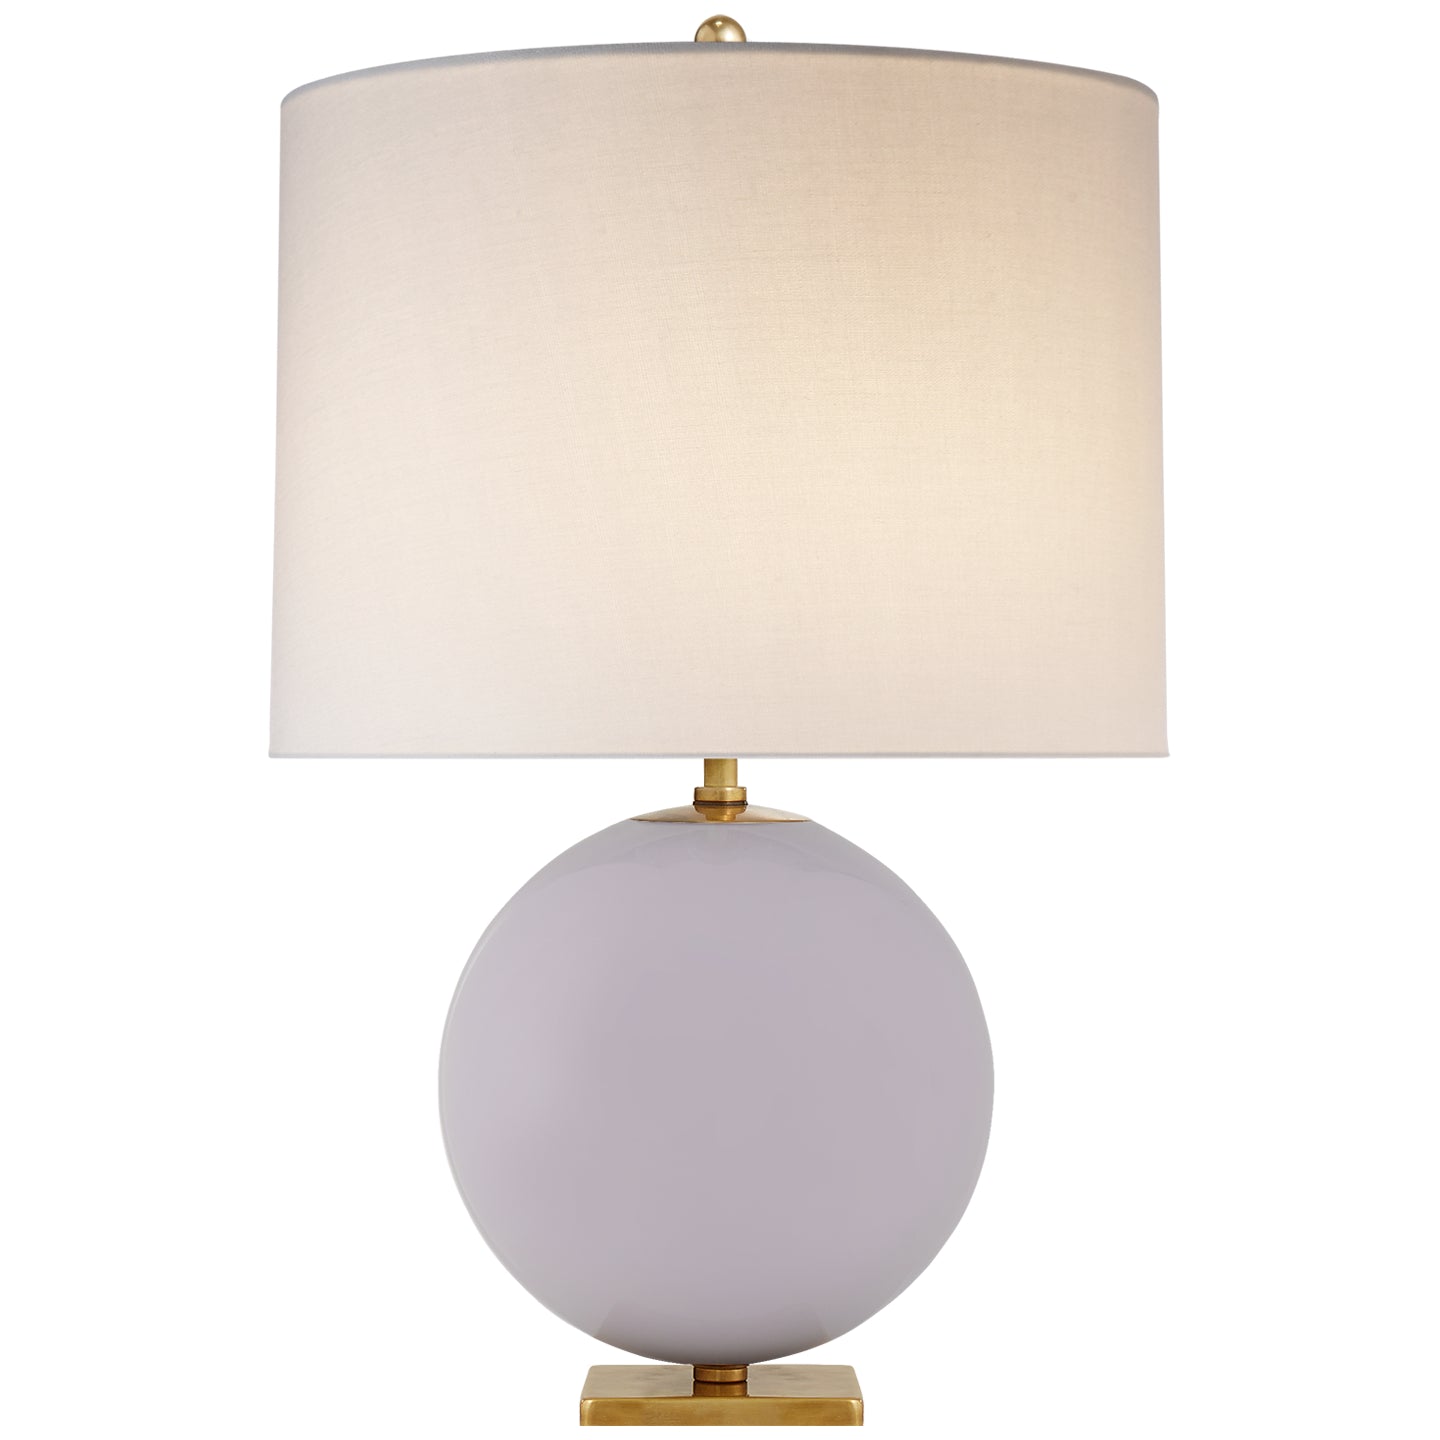 Load image into Gallery viewer, Visual Comfort Signature - KS 3014LLC-L - One Light Table Lamp - Elsie - Lilac
